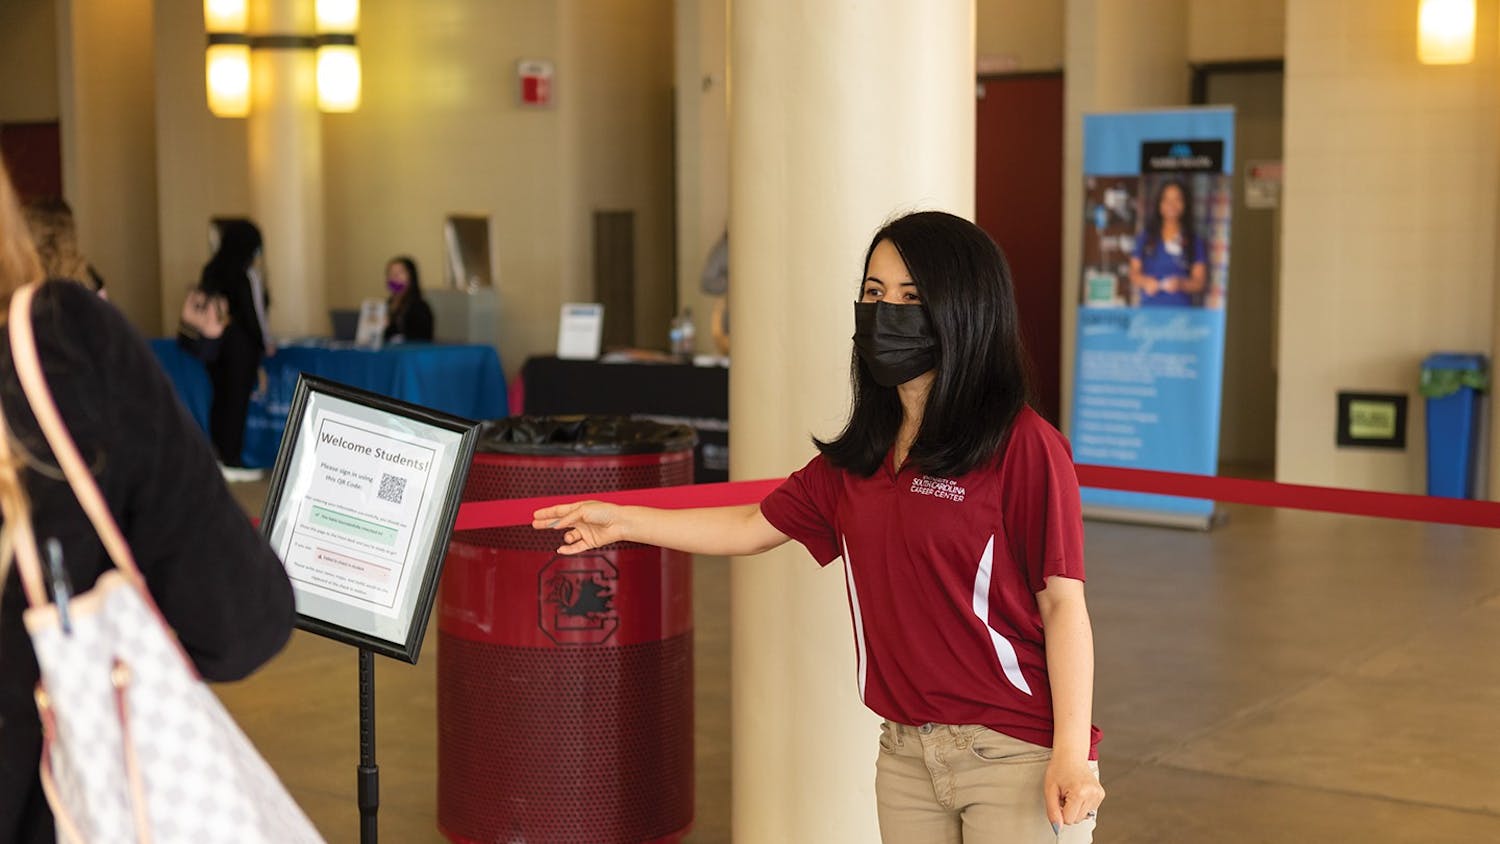 Ph.D. student Zo Sediqi directs students during the Health and Wellness job fair hosted by the USC Career Center on Feb. 2, 2022.